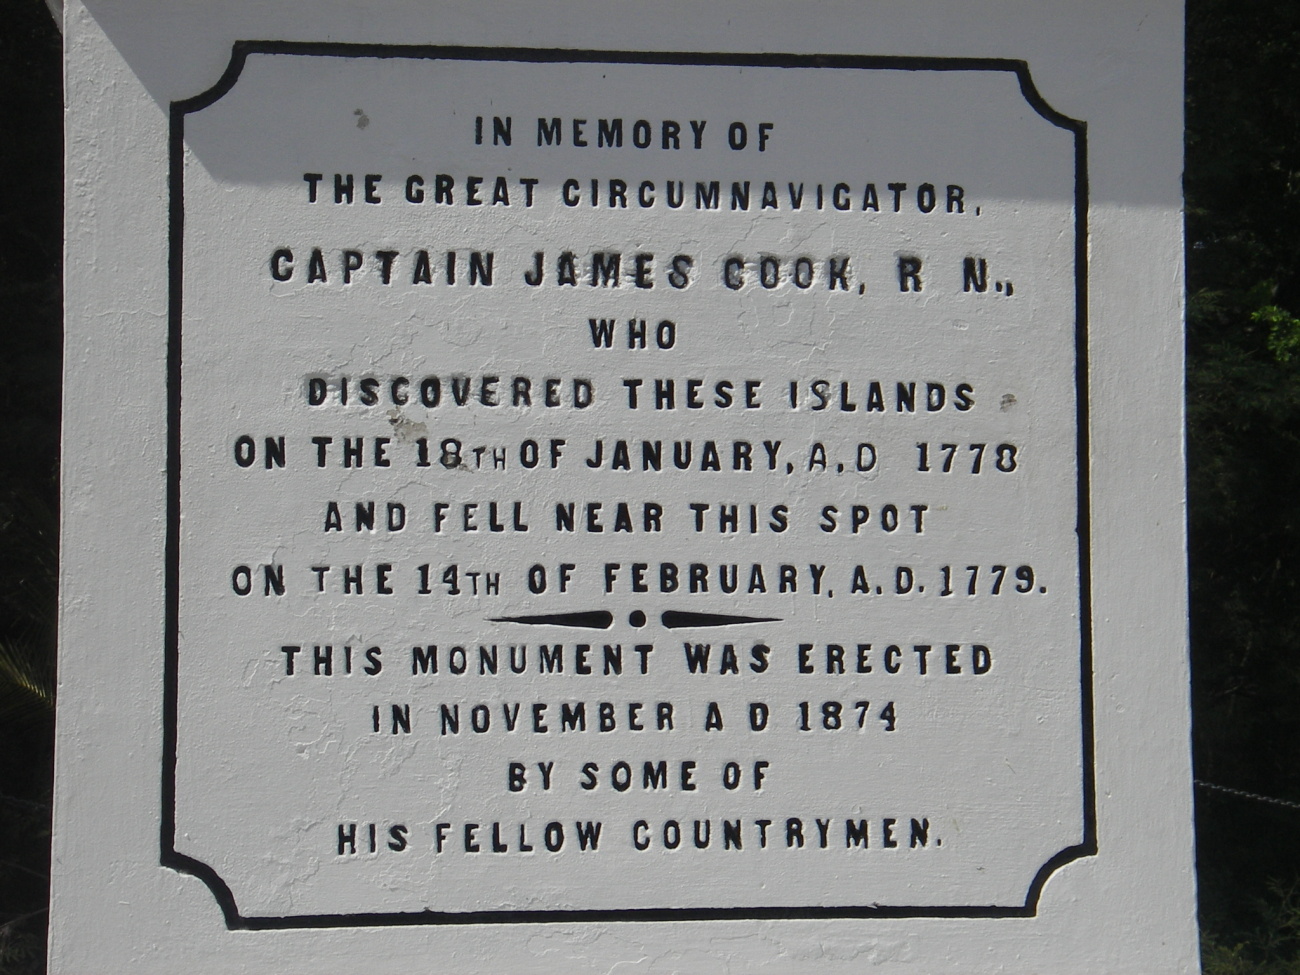 The Captain Cook monument at Kealakekua Bay, where he was struck downand killed